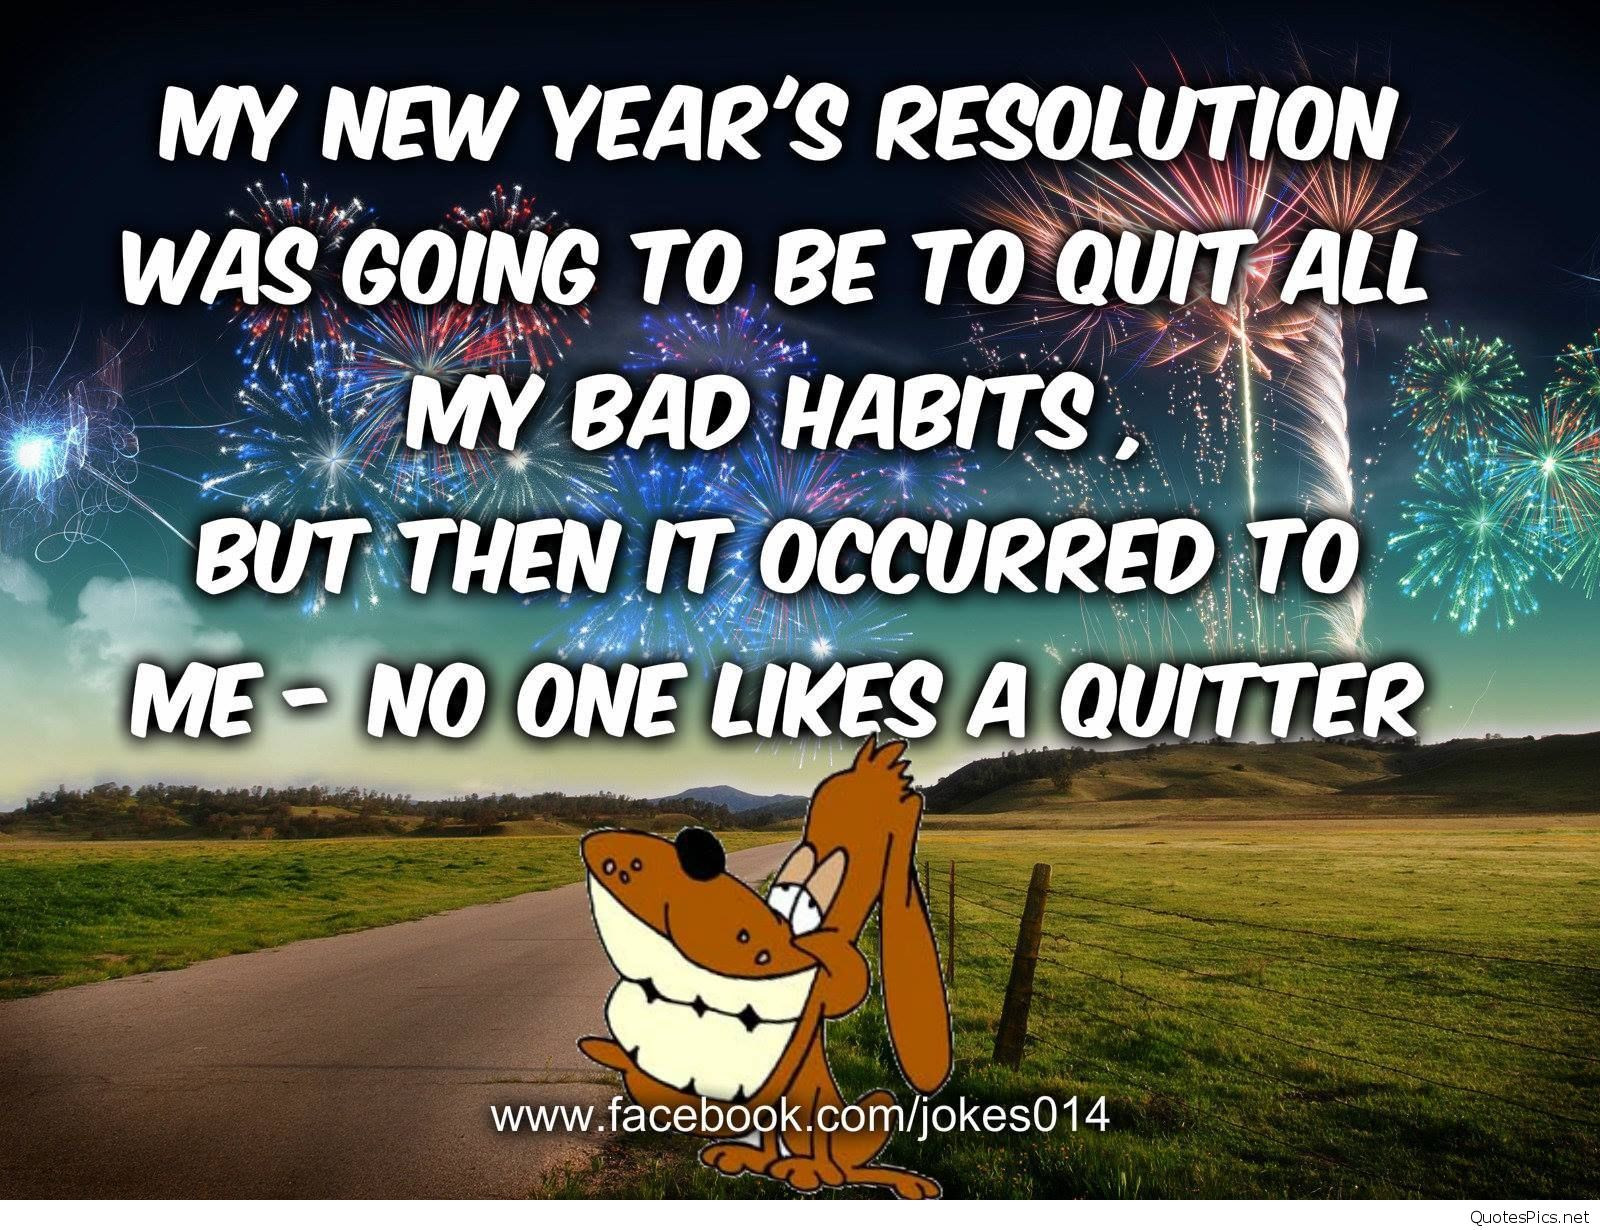 New Year Eve Funny Quotes
 Funny happy new year resolutions images & sayings cards 2017